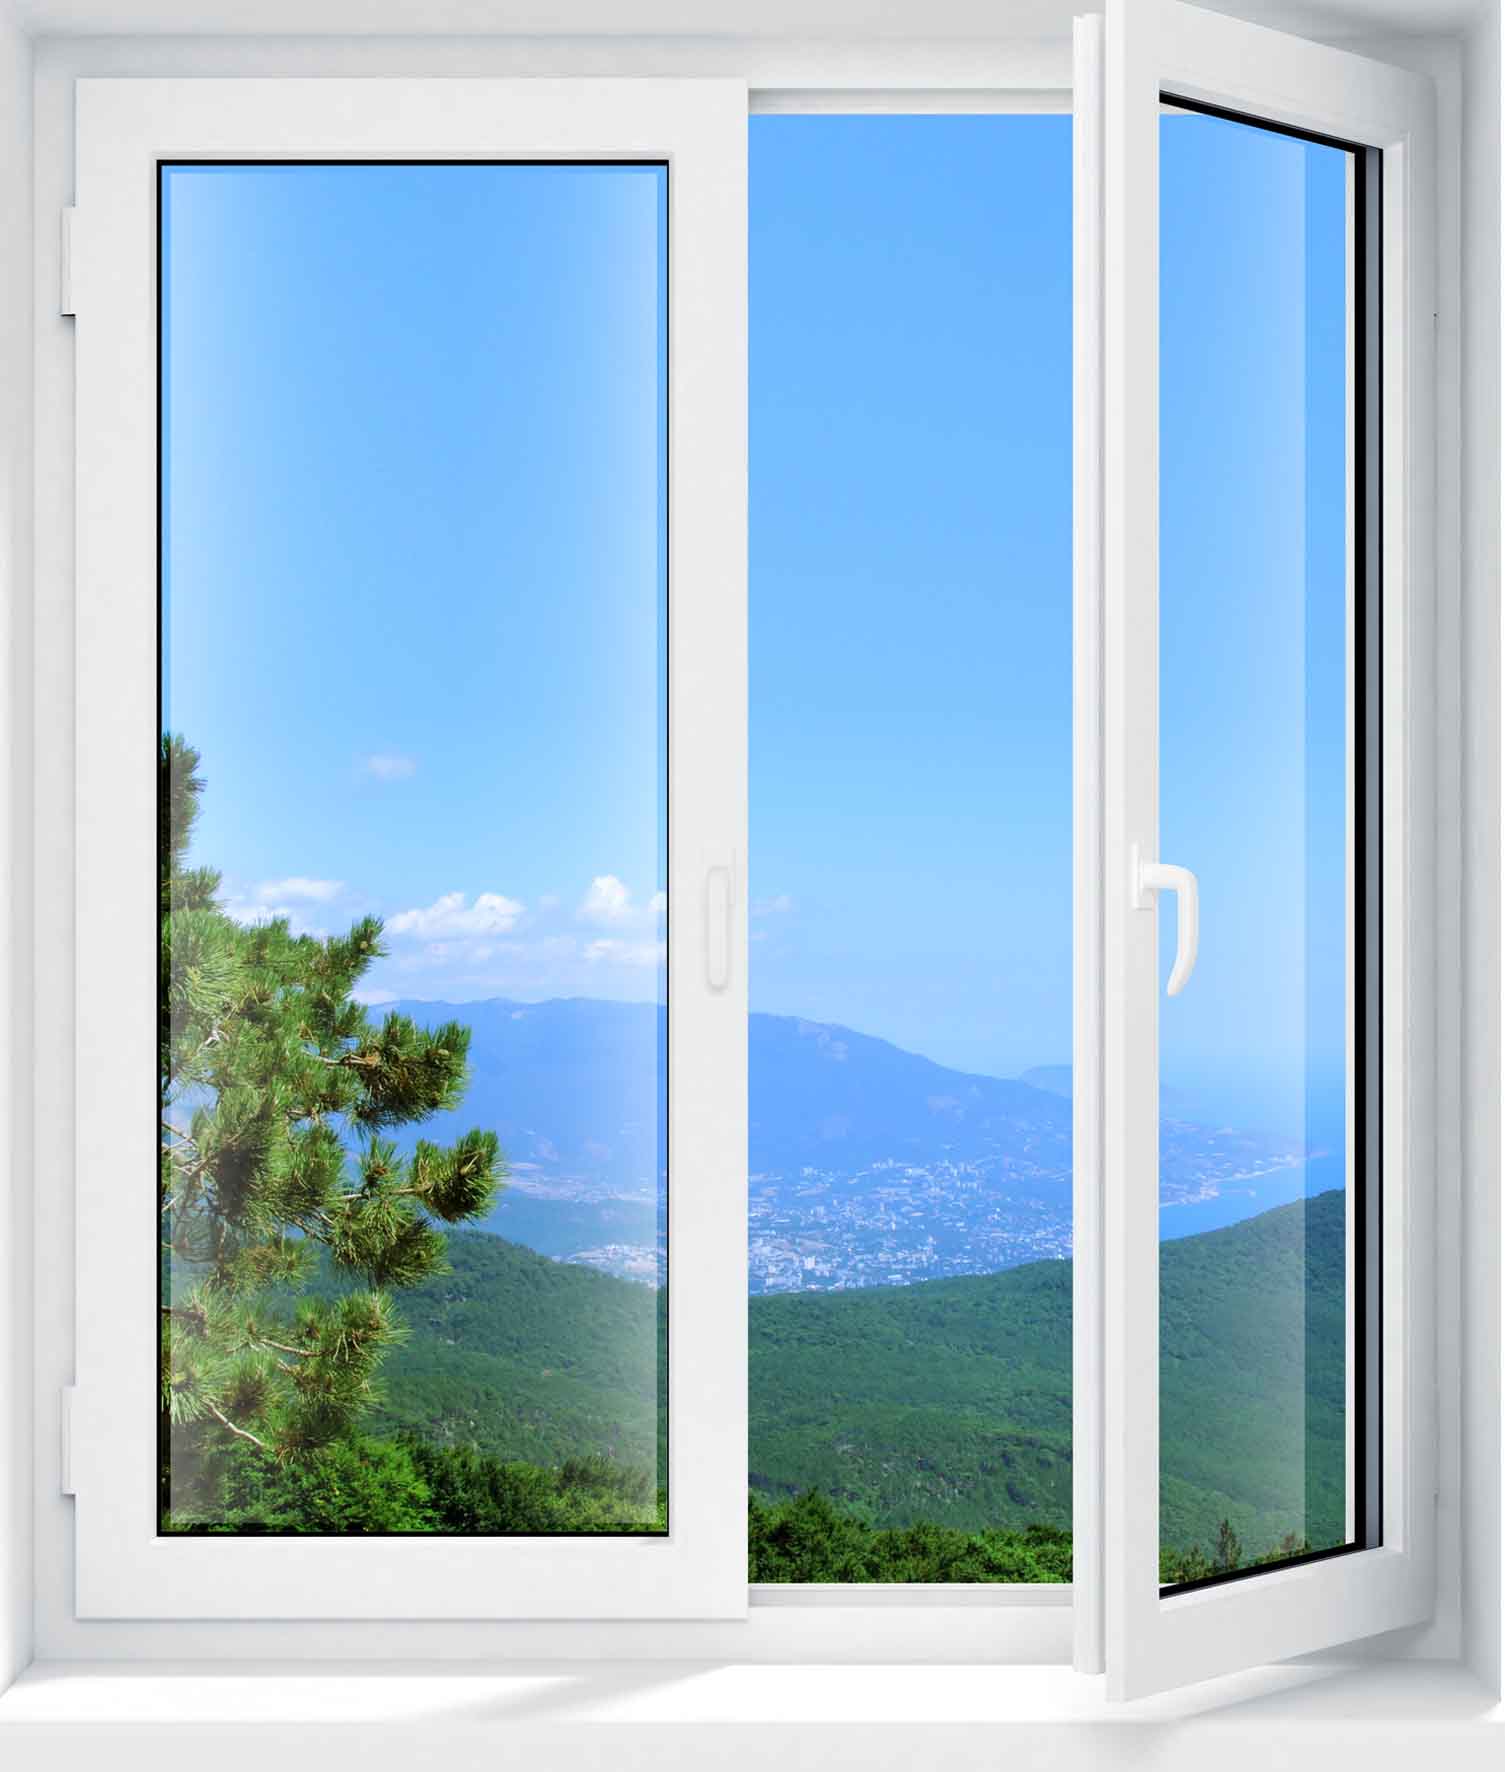   The main raw material for the manufacture of a window profile is polyvinyl chloride. In addition, it includes various additives to give the plastic the necessary properties. Thanks to special modifiers, stabilizers, antioxidants and other groups of substances plastic gets the characteristics of durability, strength, dimensional stability and color.